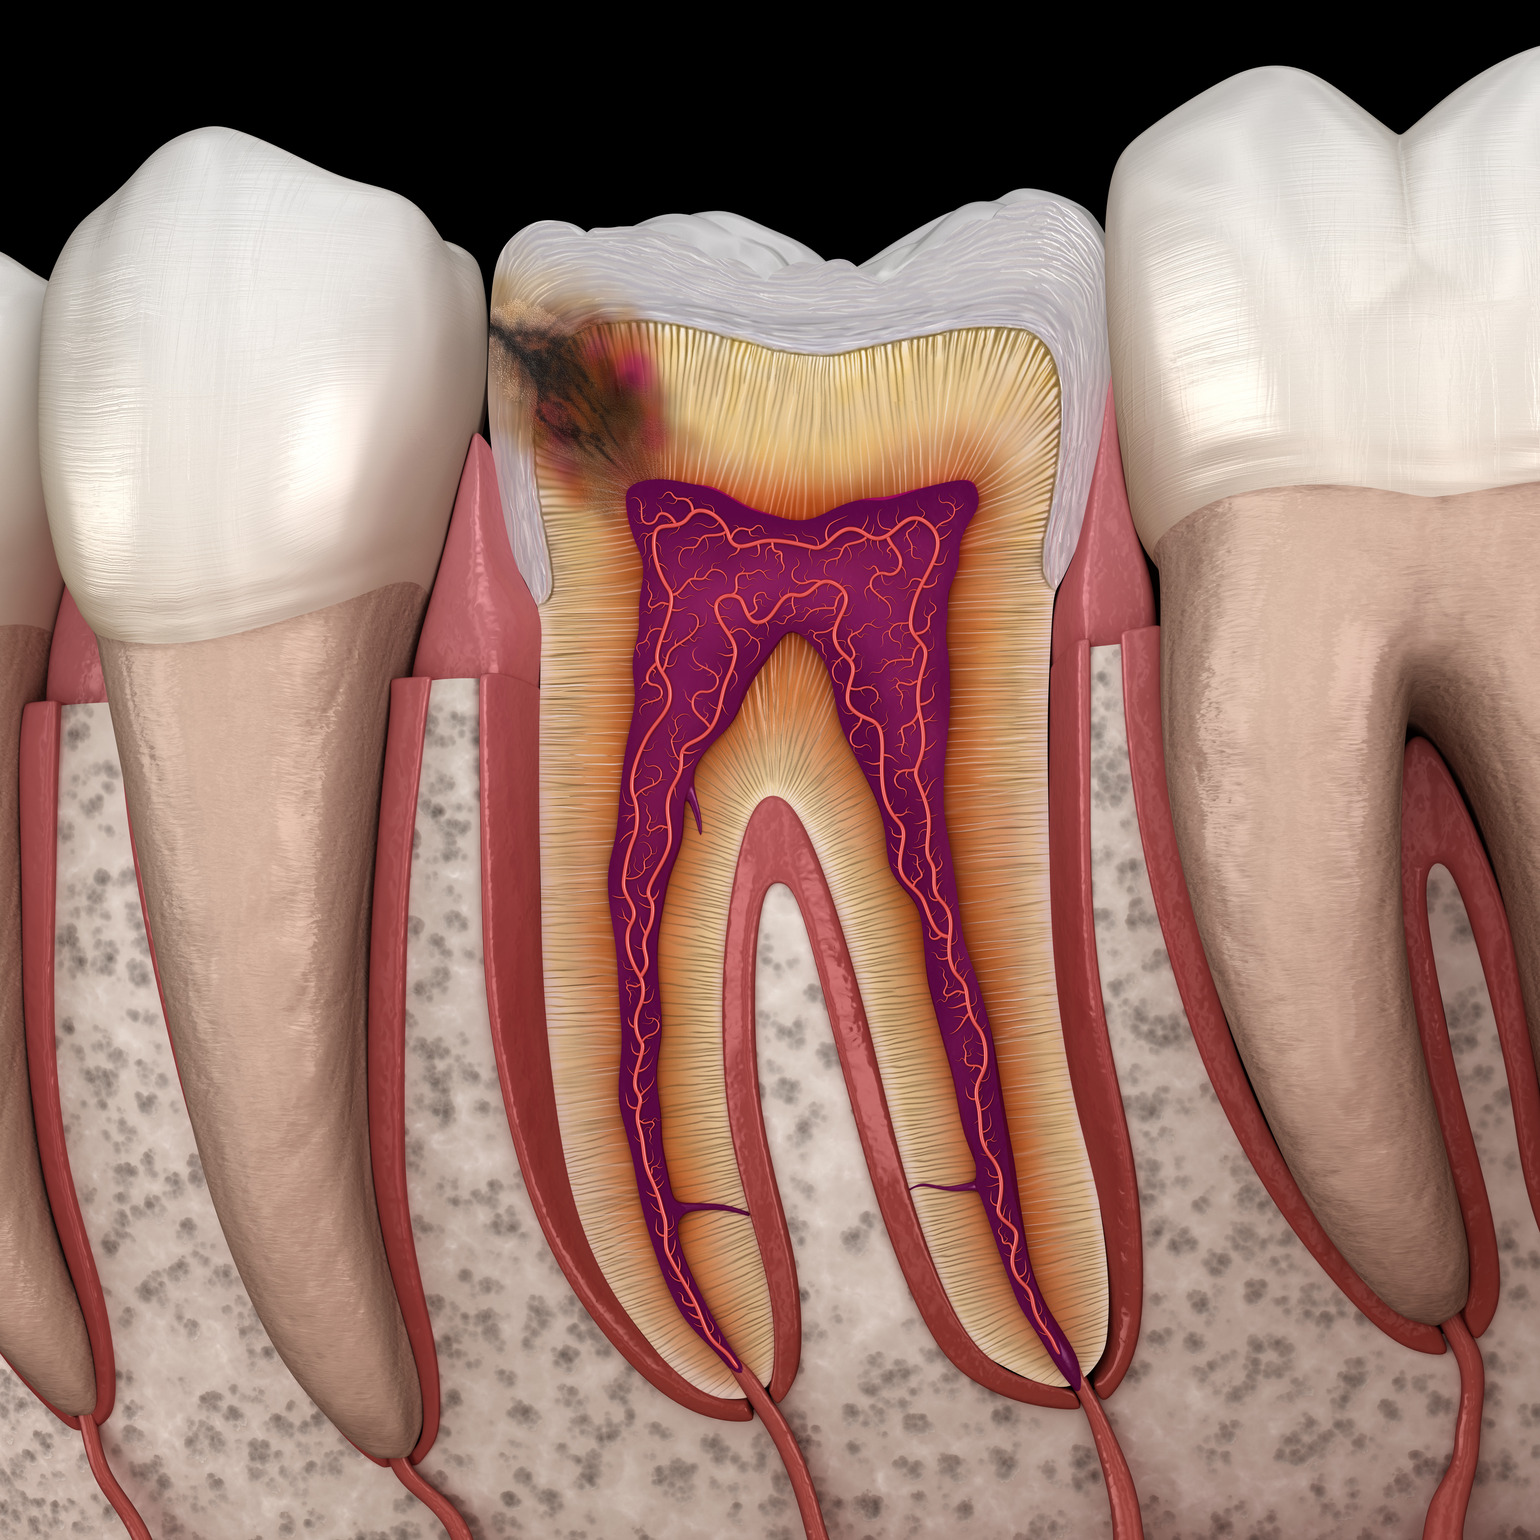 Cavity Between Teeth - Causes and Treatment Options